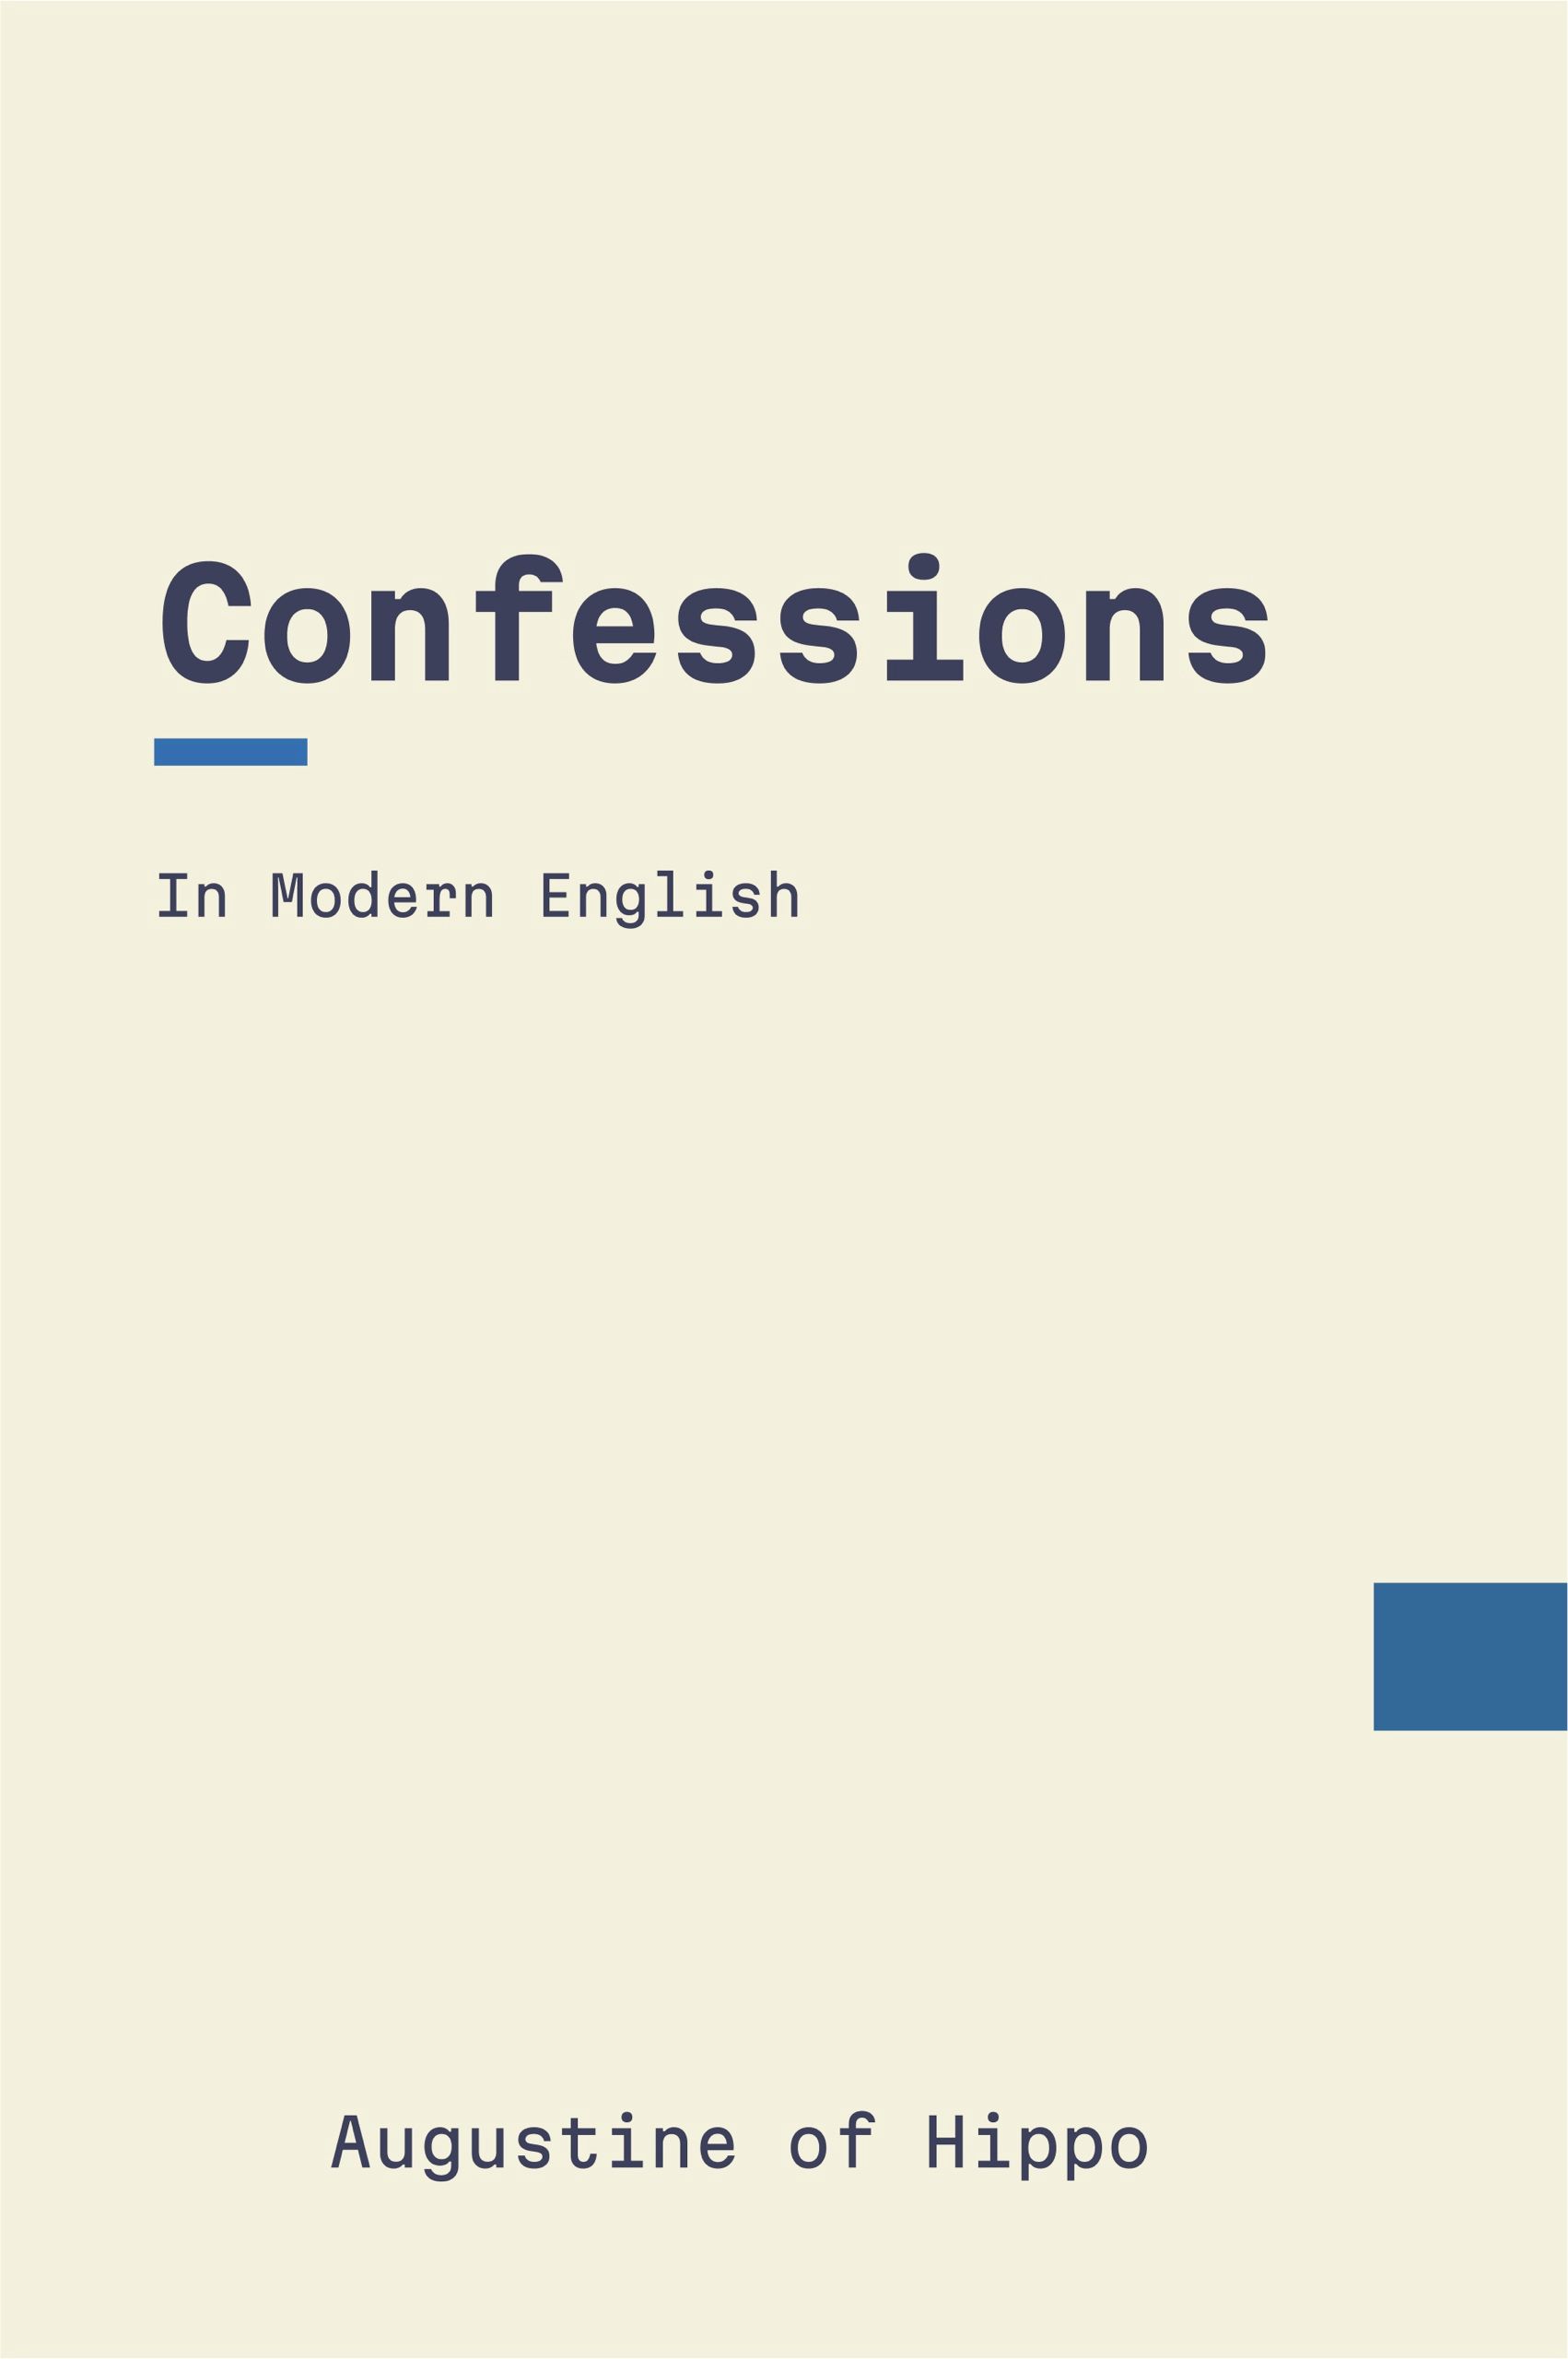 Confessions by Augustine (Modern English)